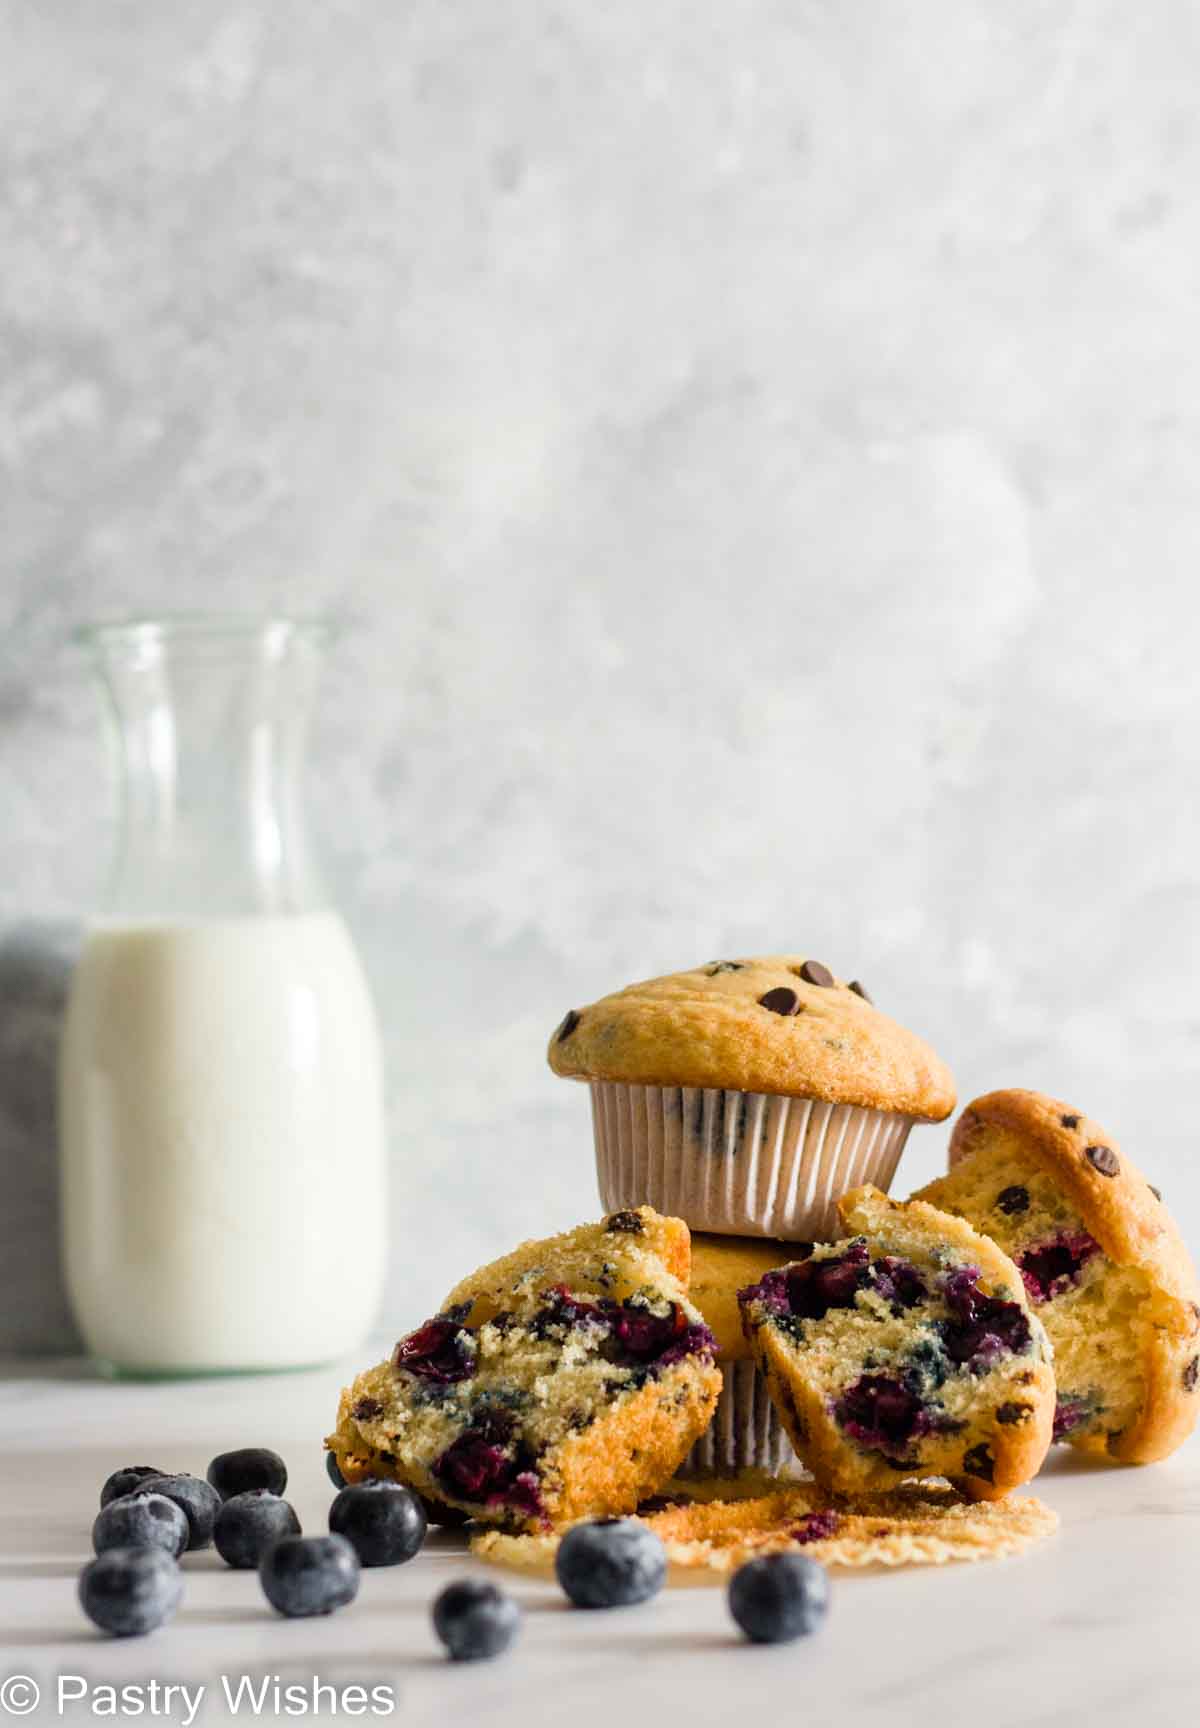 A stack of blueberry chocolate chip muffins on a white surface next to a bottle of milk and blueberries.